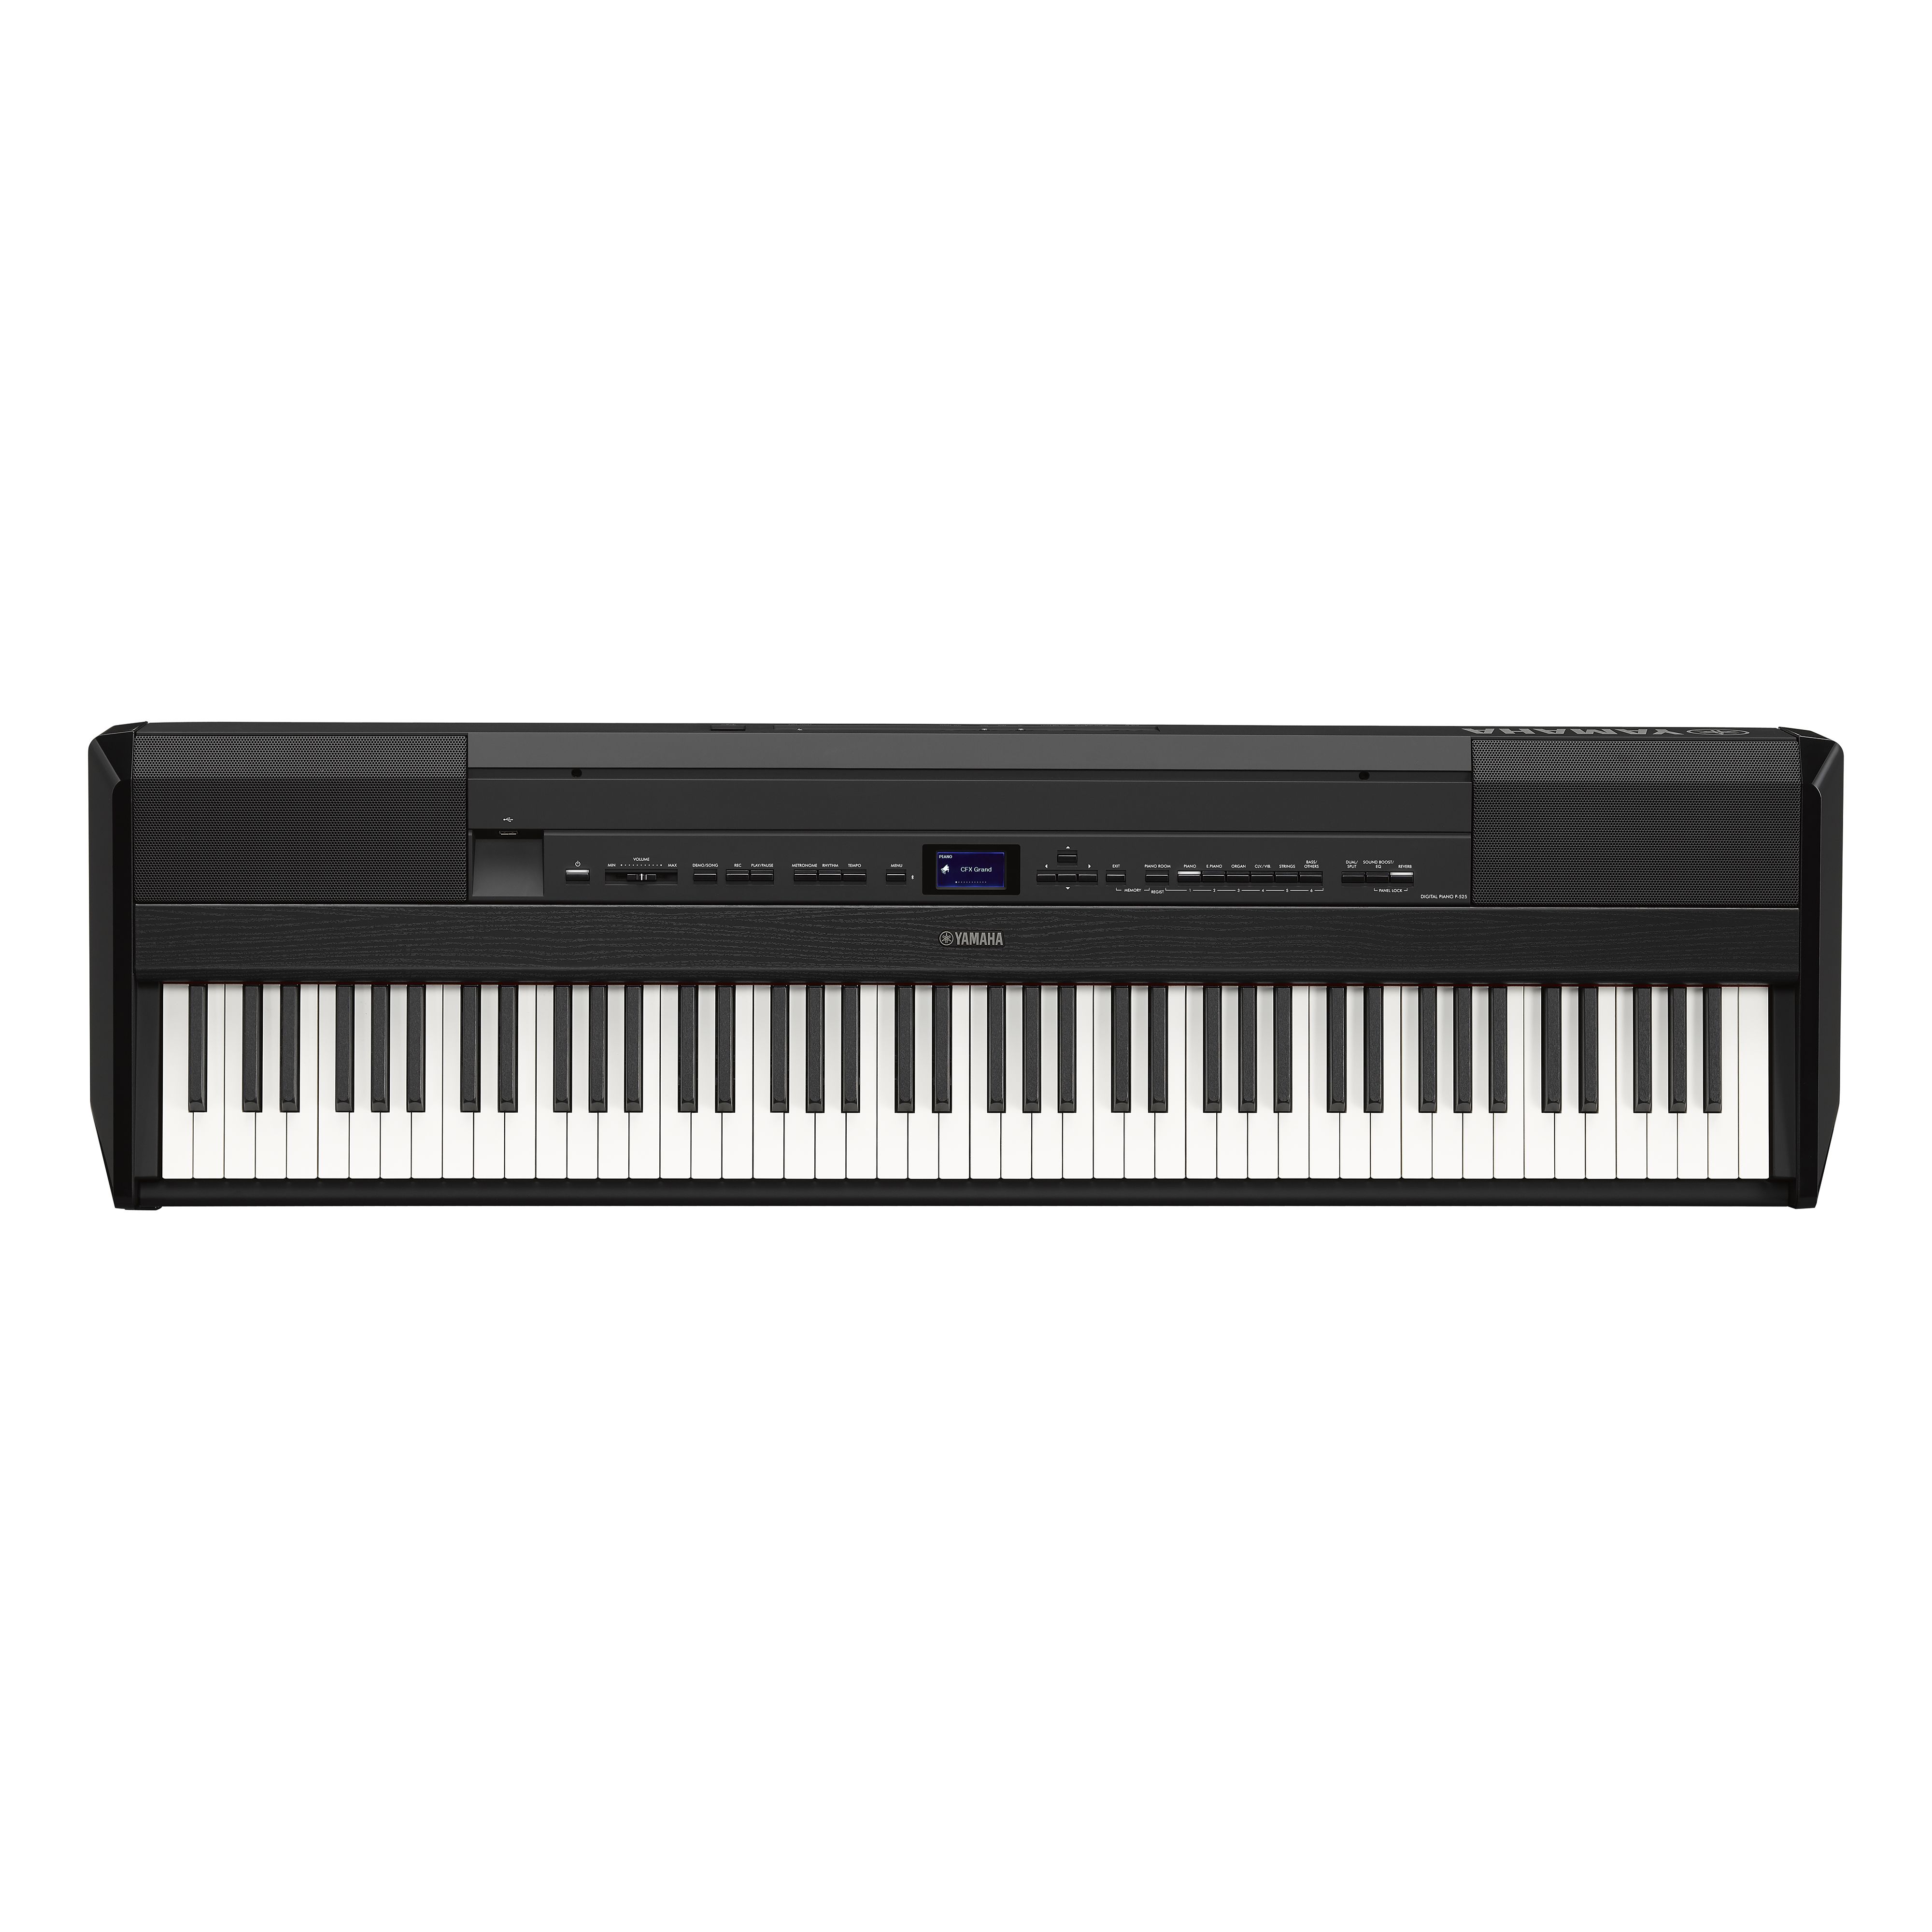 P Series - Pianos - Musical Instruments - Products - Yamaha